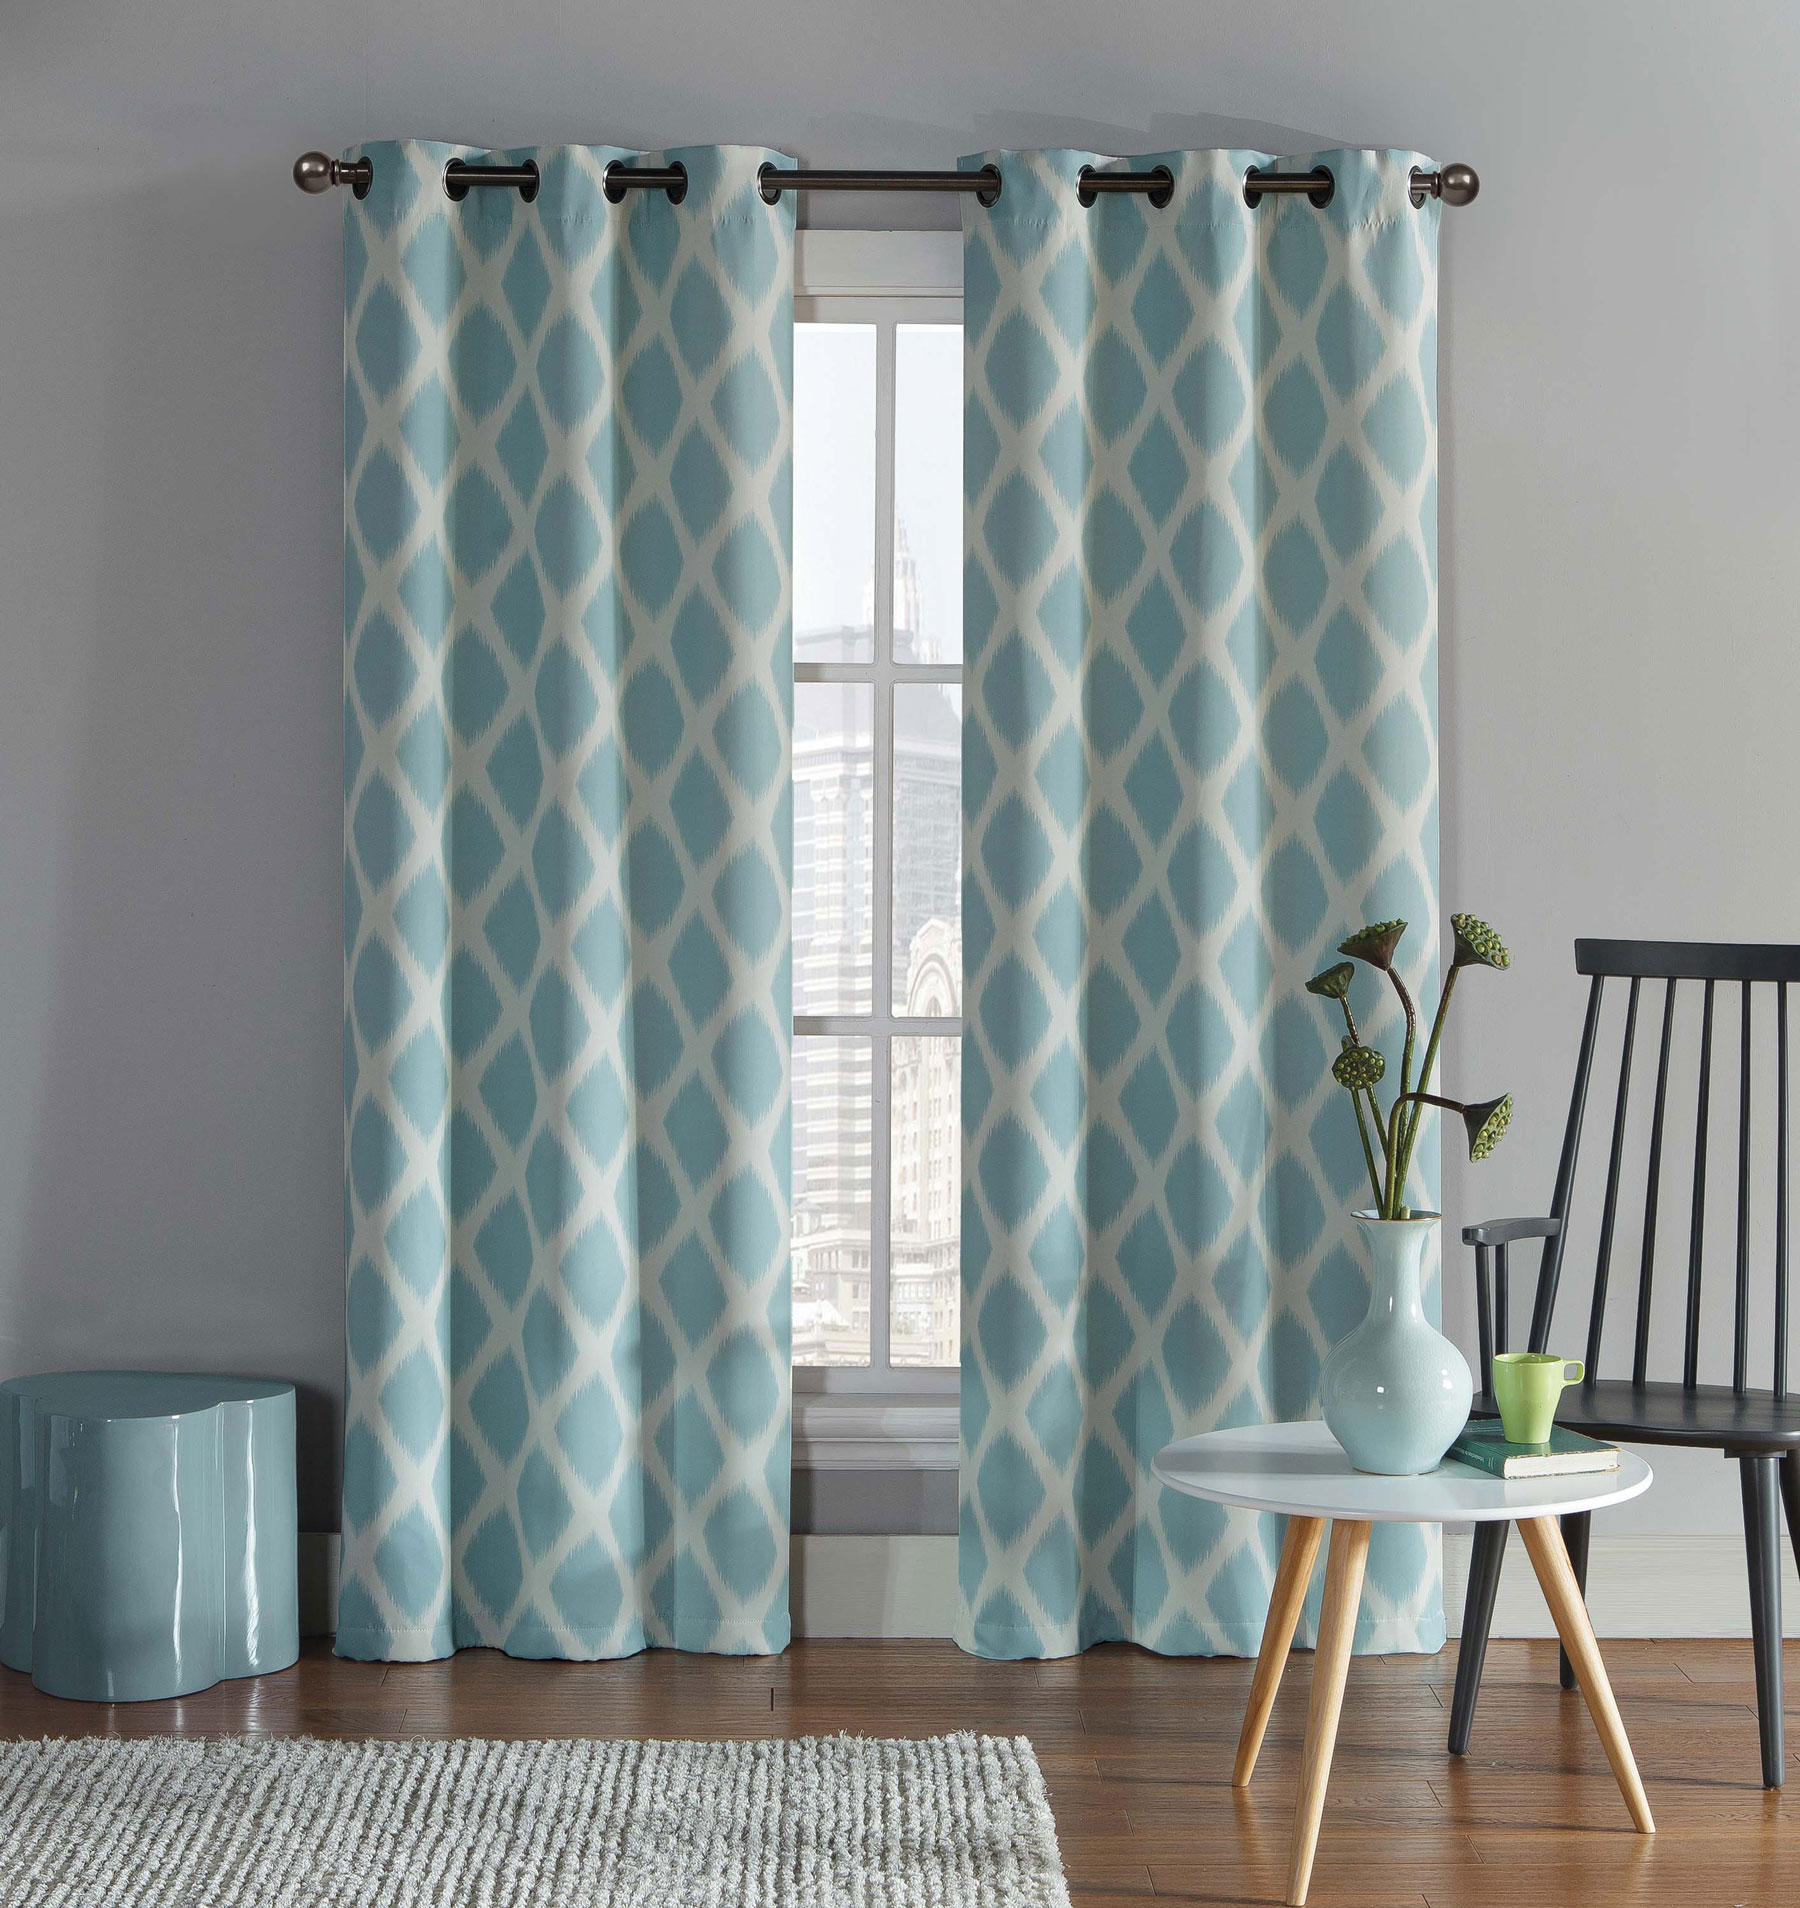 How to Hang Window Curtains